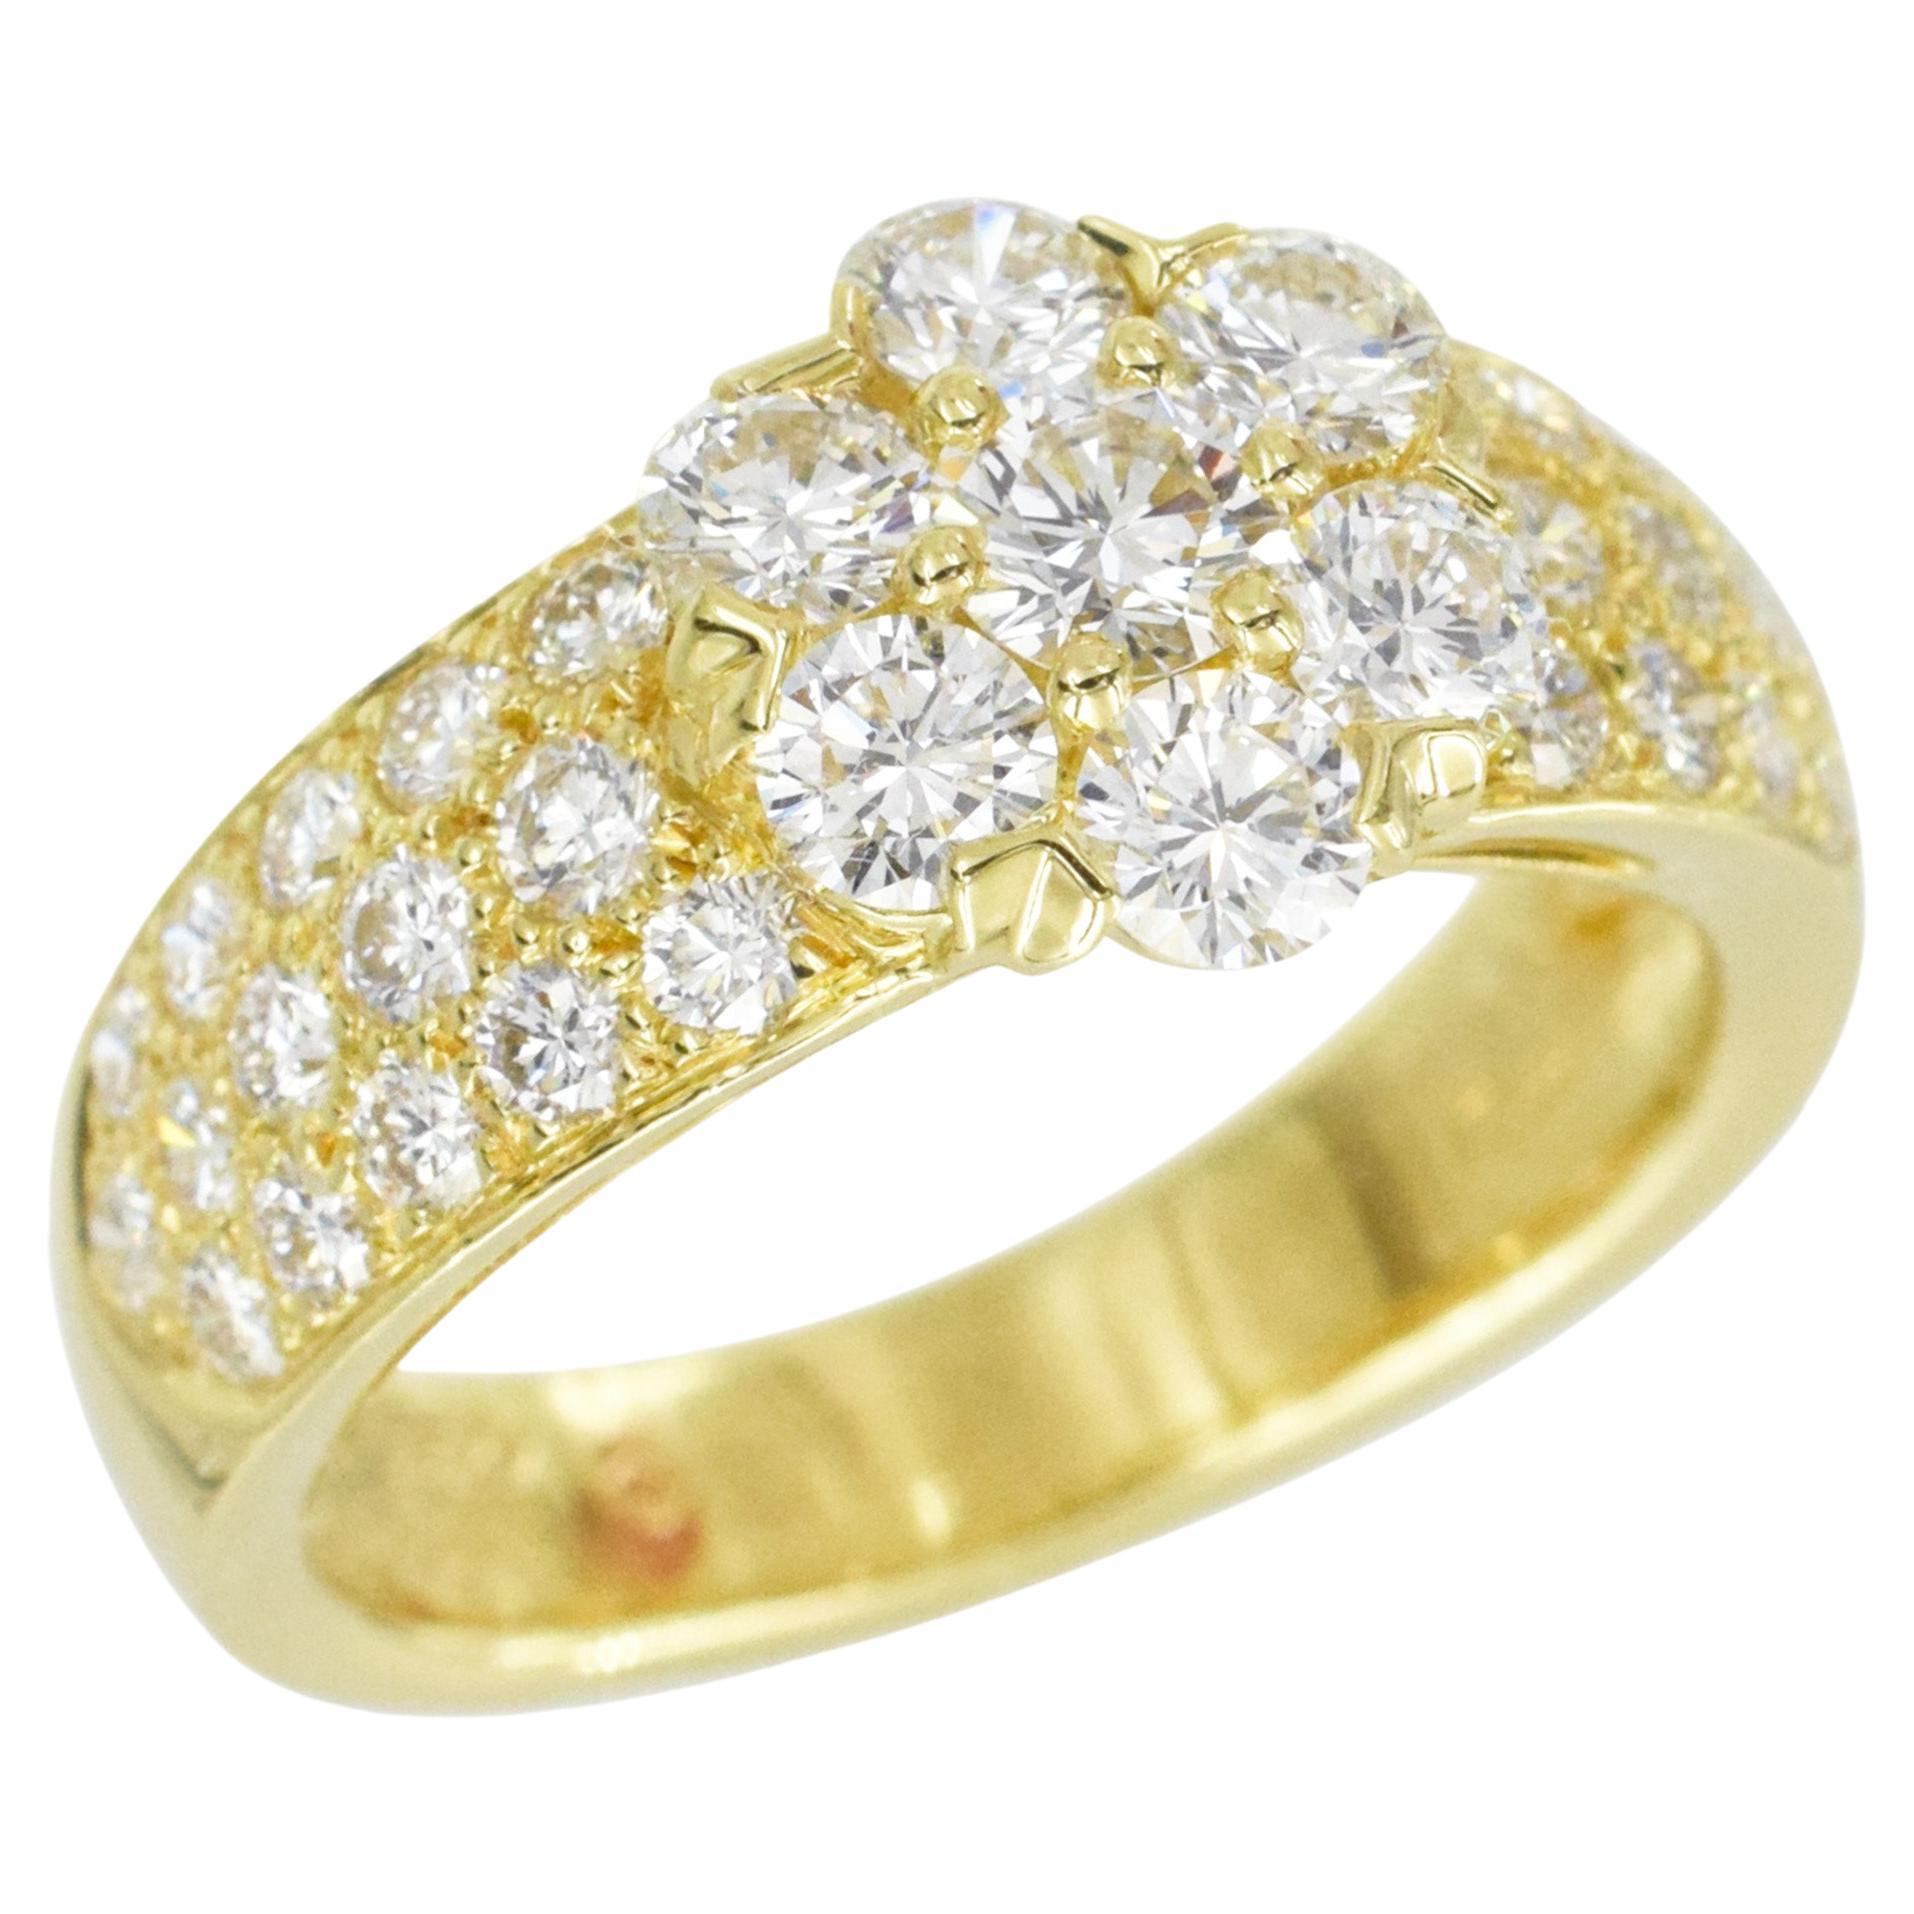 Van Cleef & Arpels Gold and Diamond Double Fleurette Ring, Cocktail Ring, Size 5, Vintage Jewelry